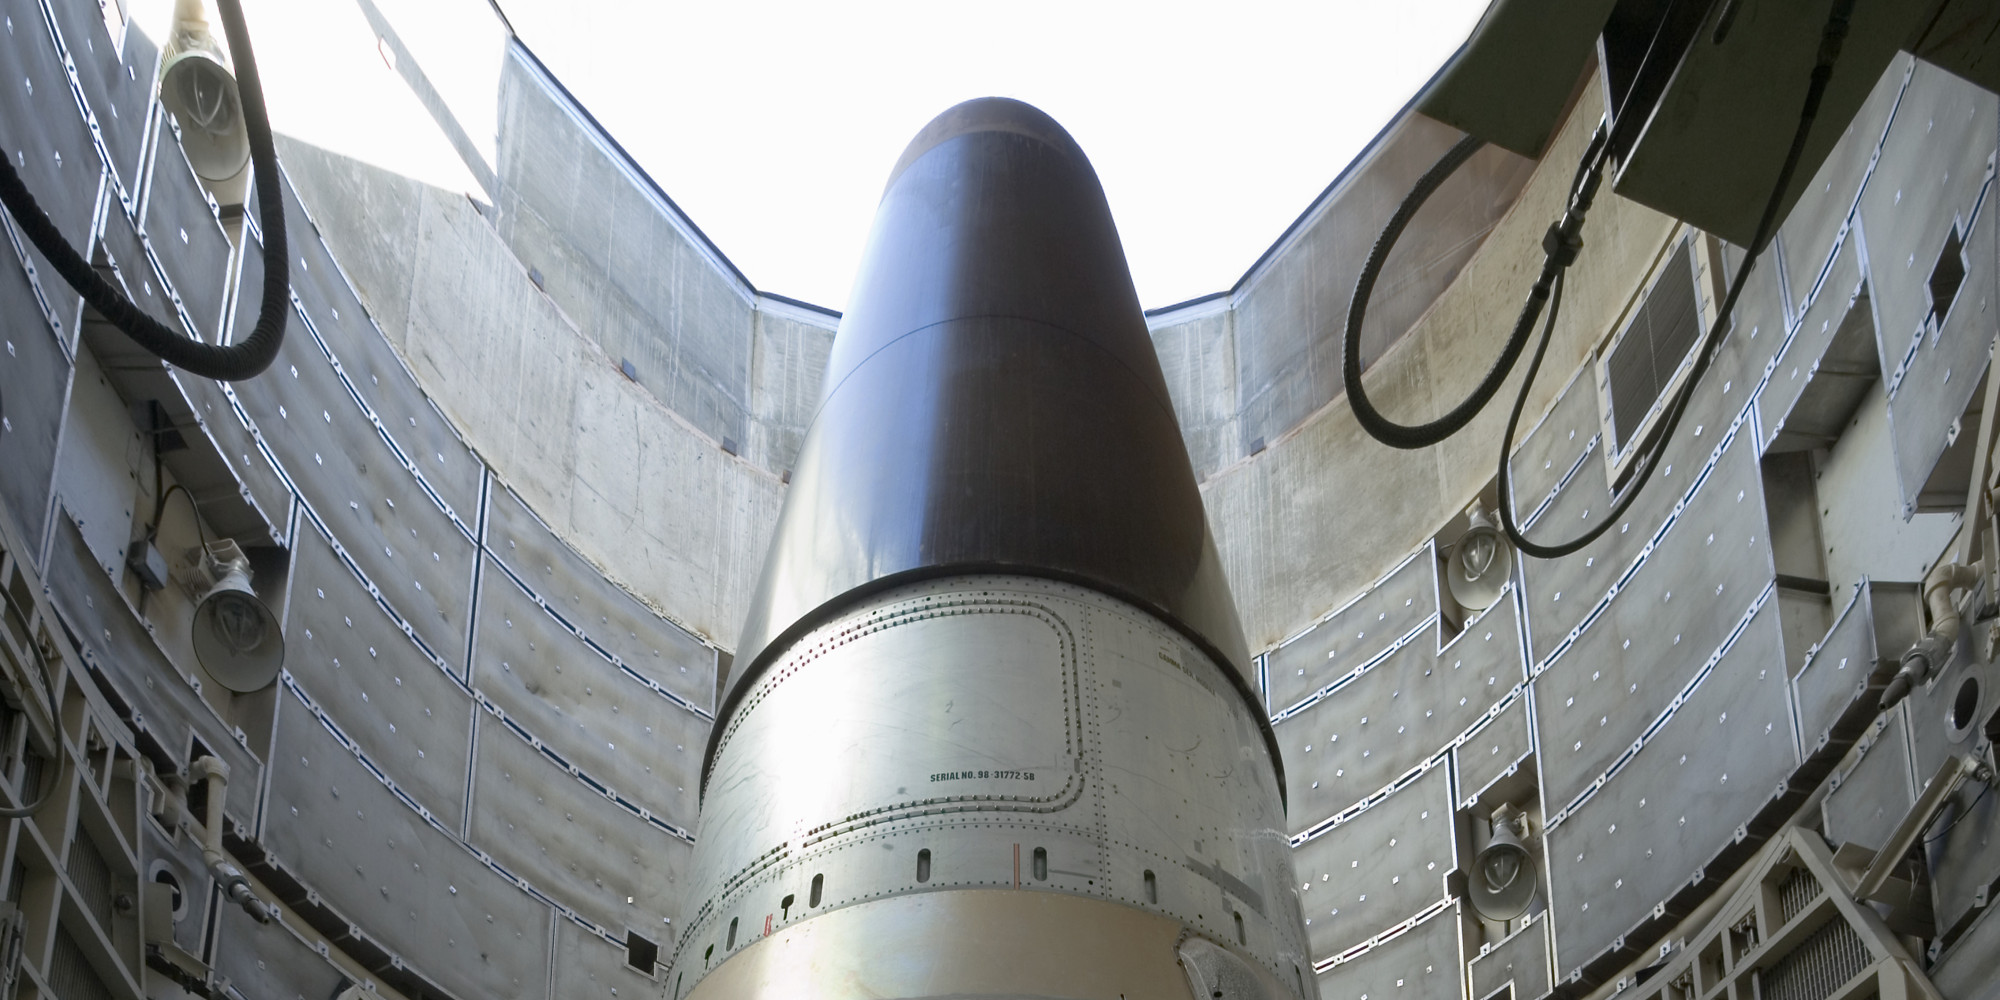 Nuclear Weapons Are The Most Consequential Threat America Faces | HuffPost